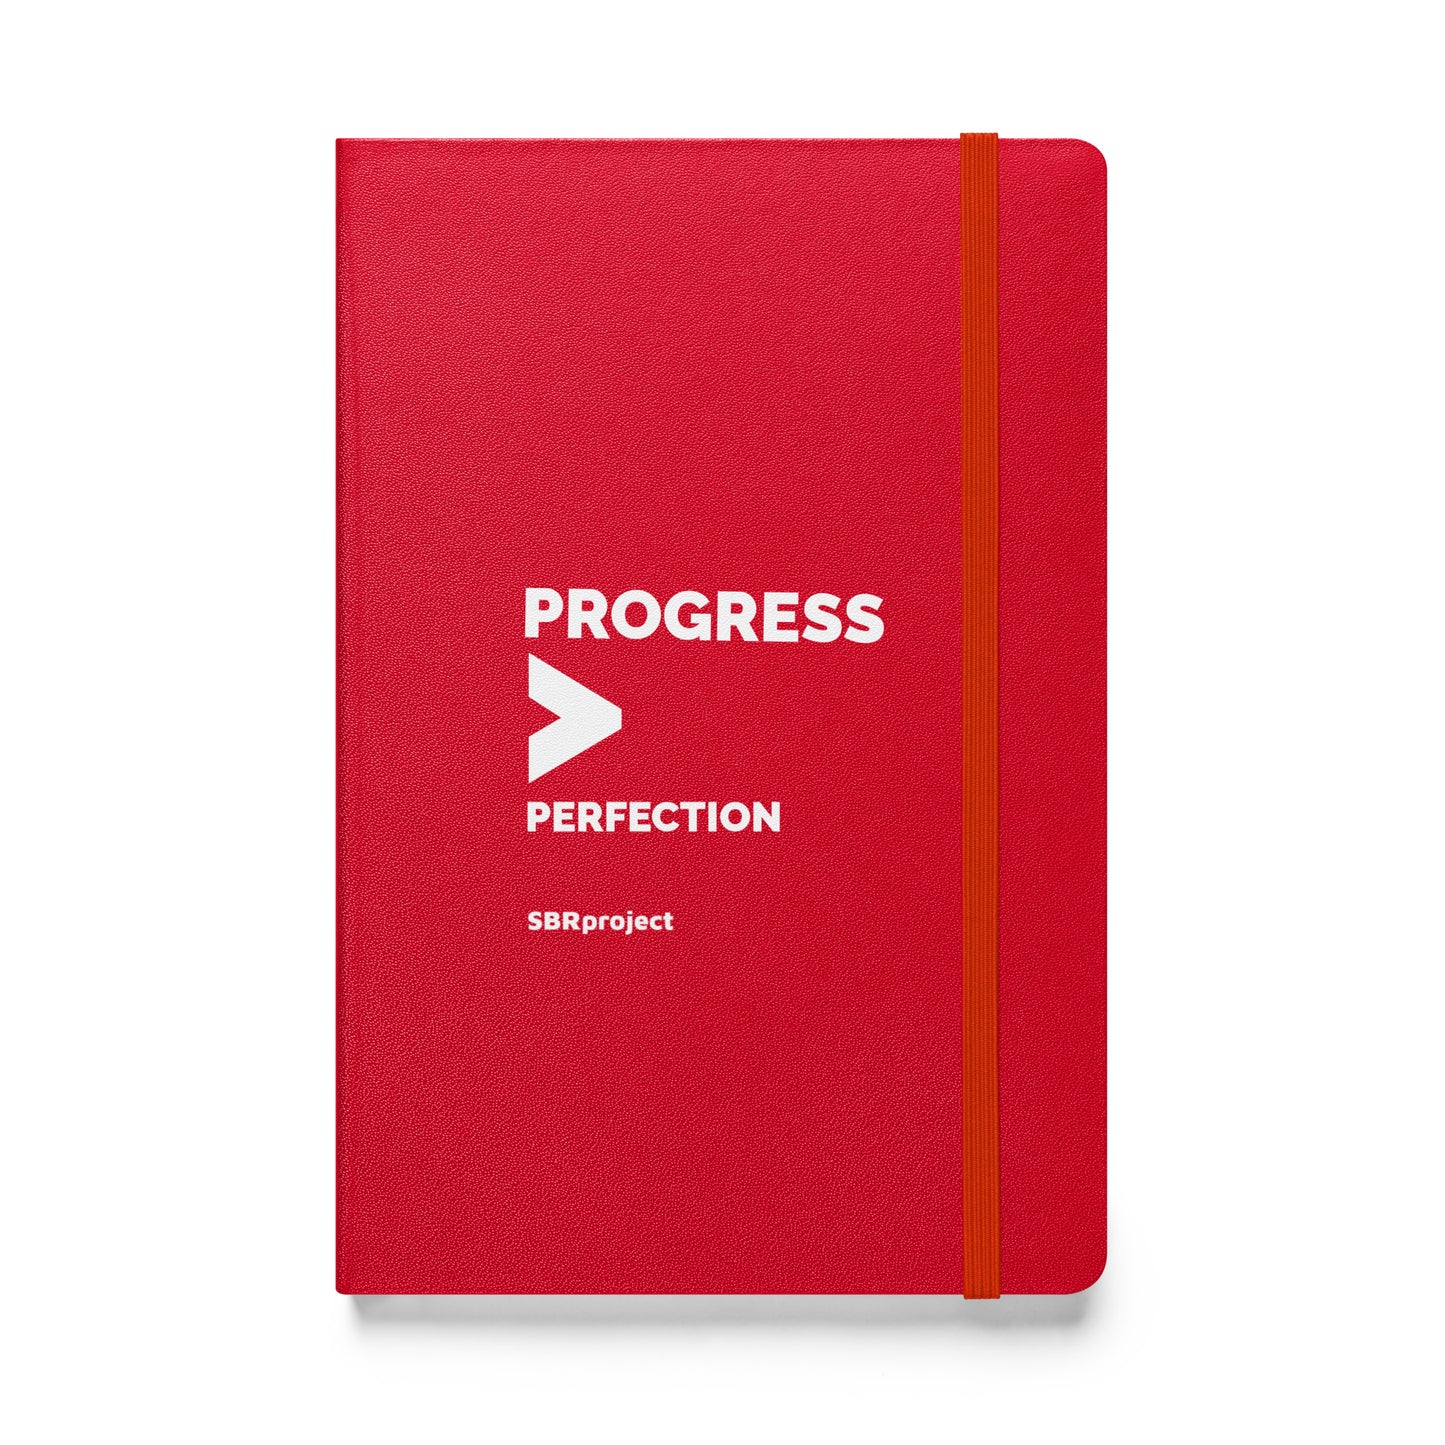 Progress is Greater Than Perfection - Hardcover Lined Journal